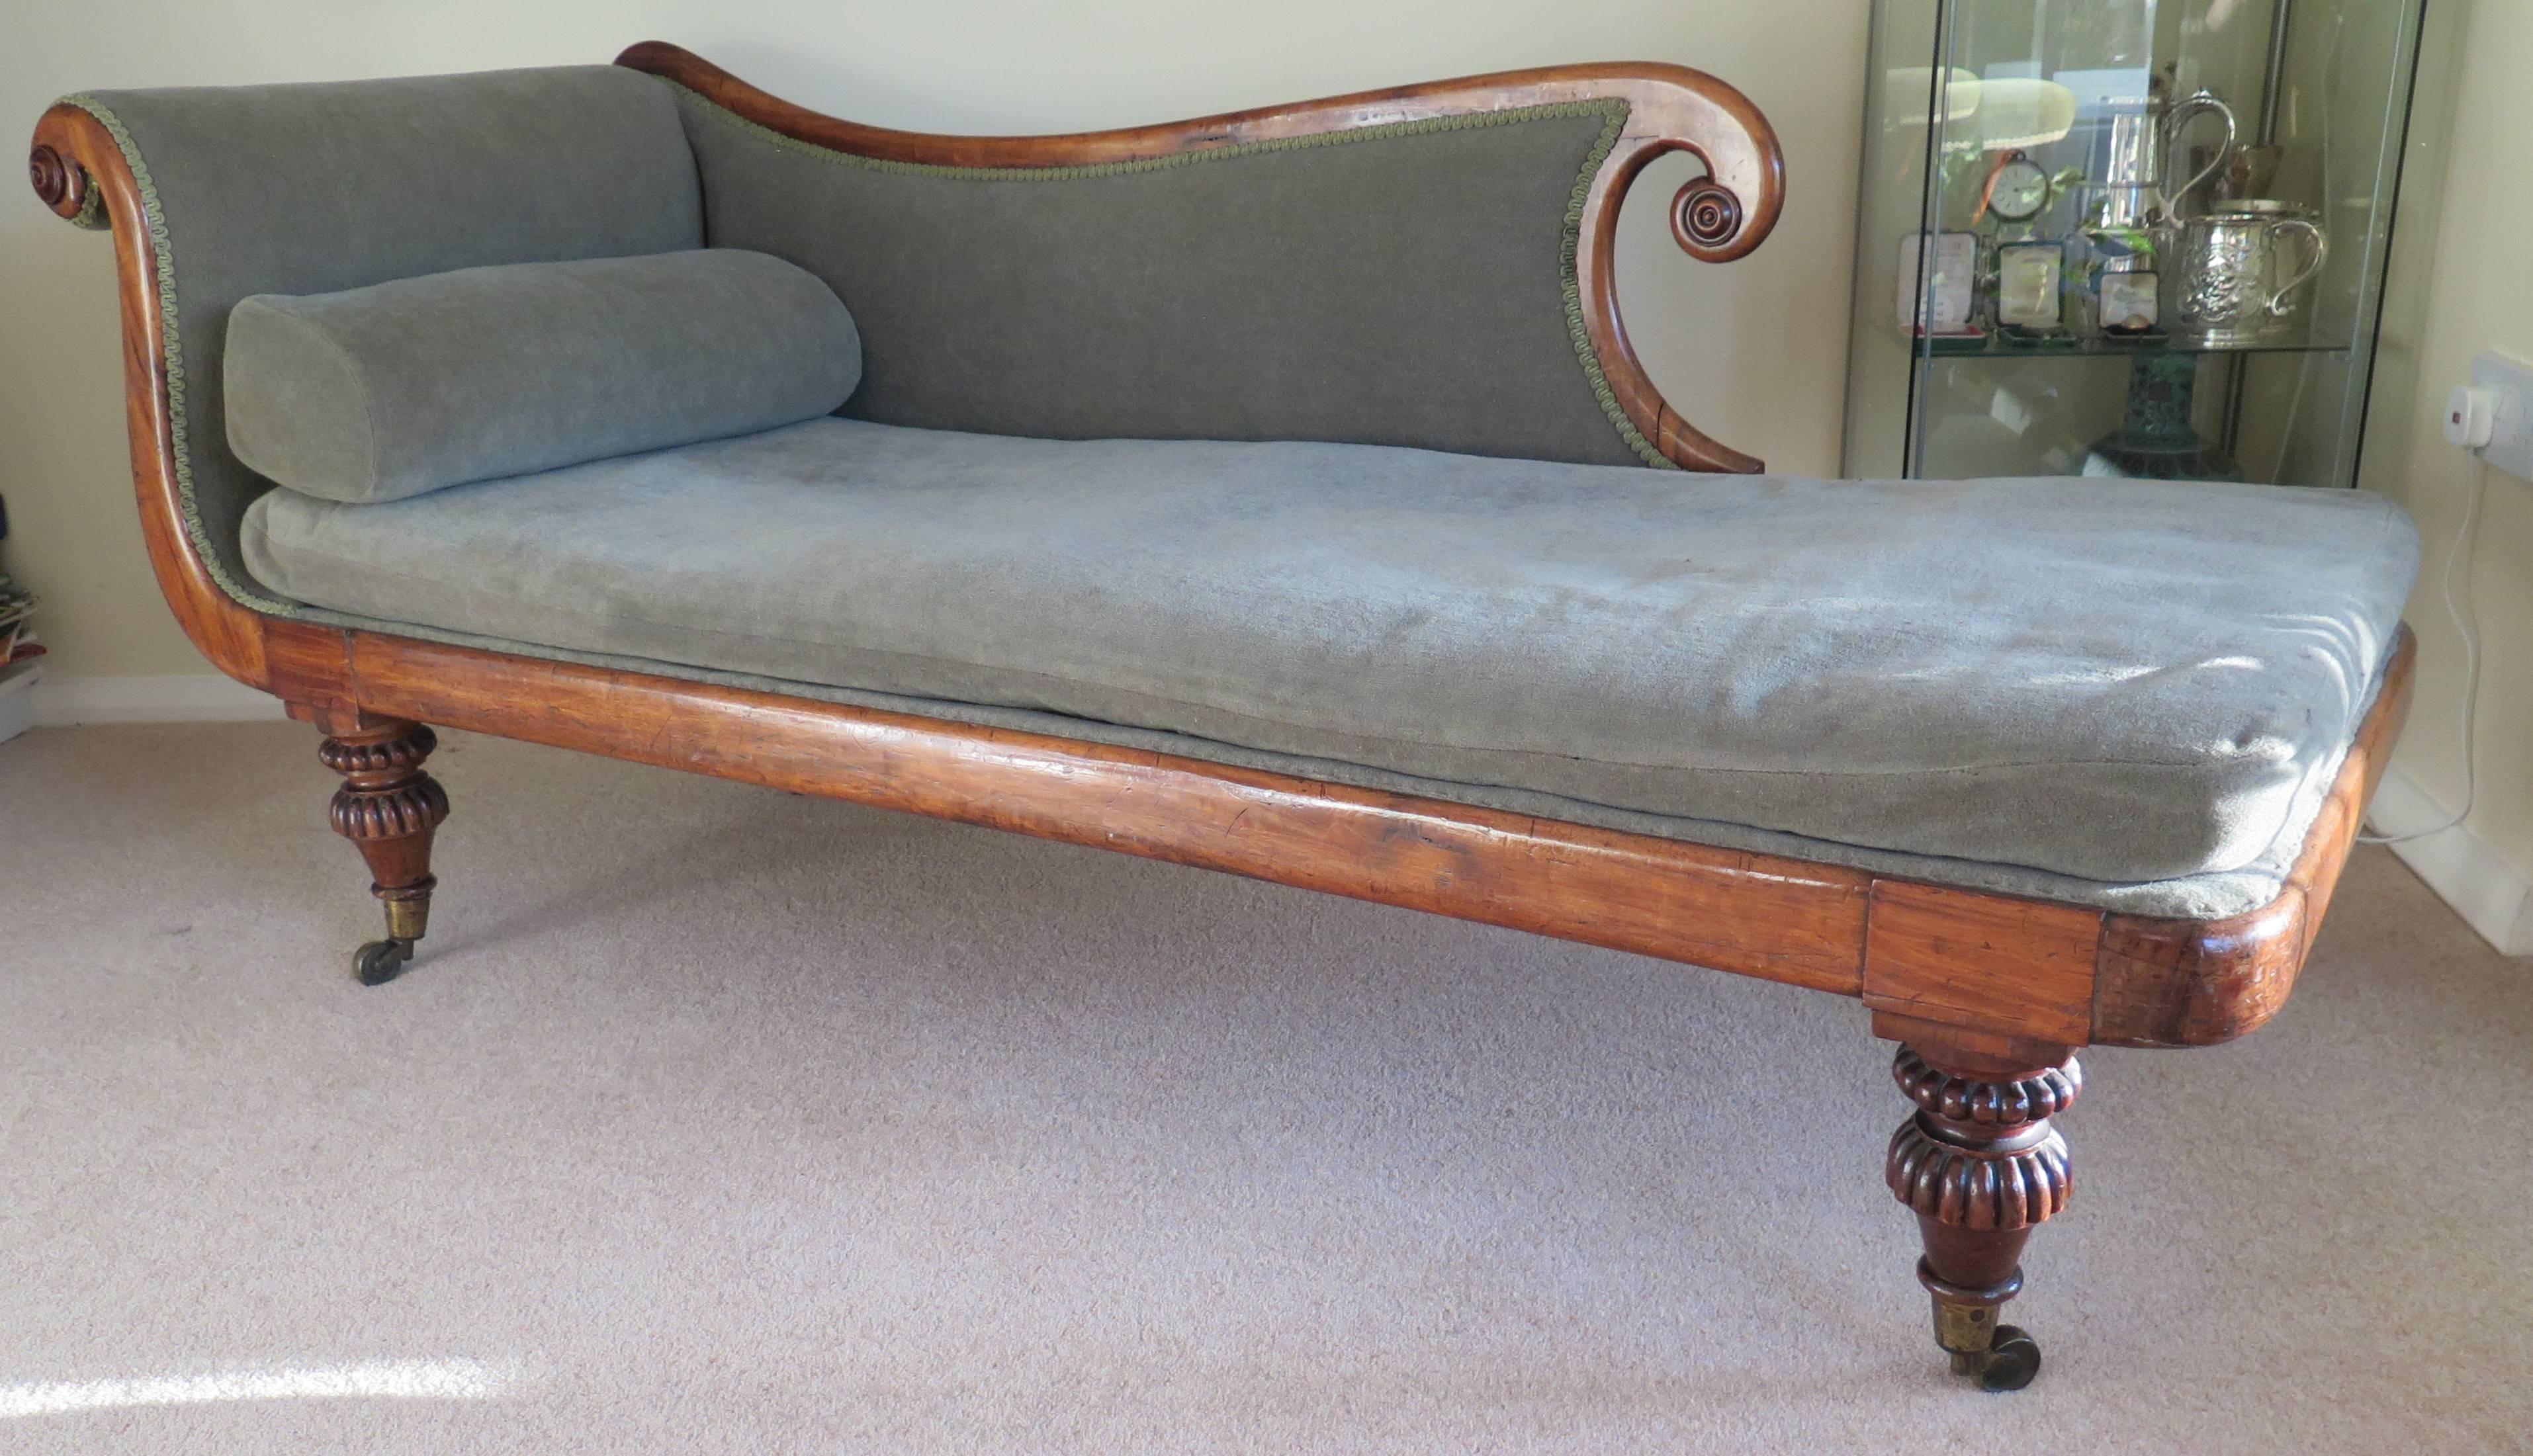 English Regency Period Chaise Longue or Daybed, Mahogany, William IVth, circa 1830